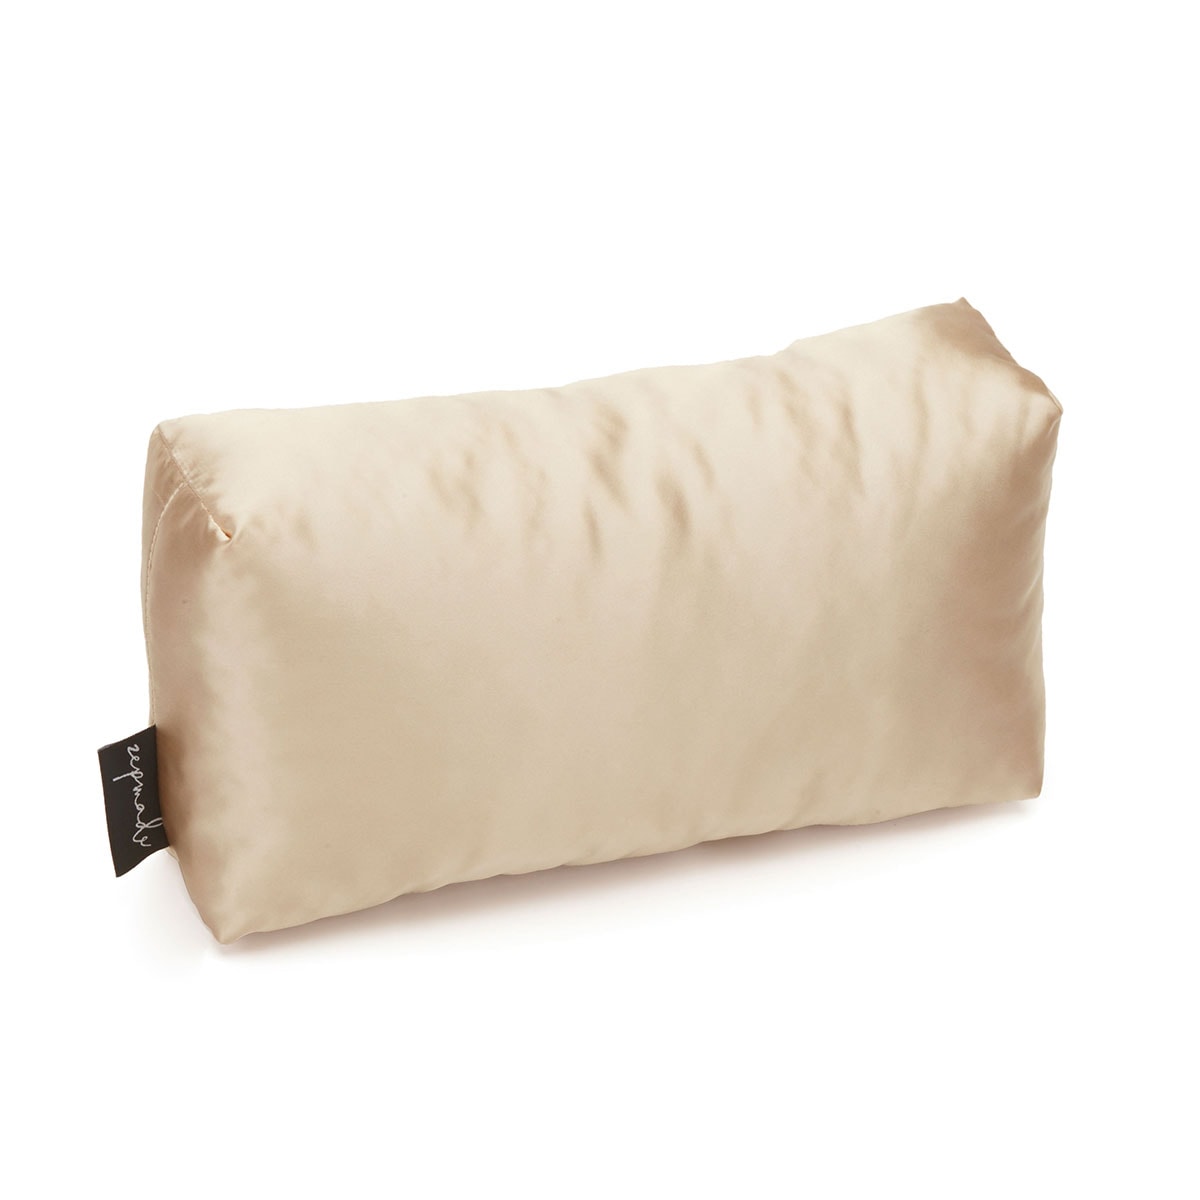 Leather Pillow Bag Shaper In Large Size (14.1” X 11.02” )